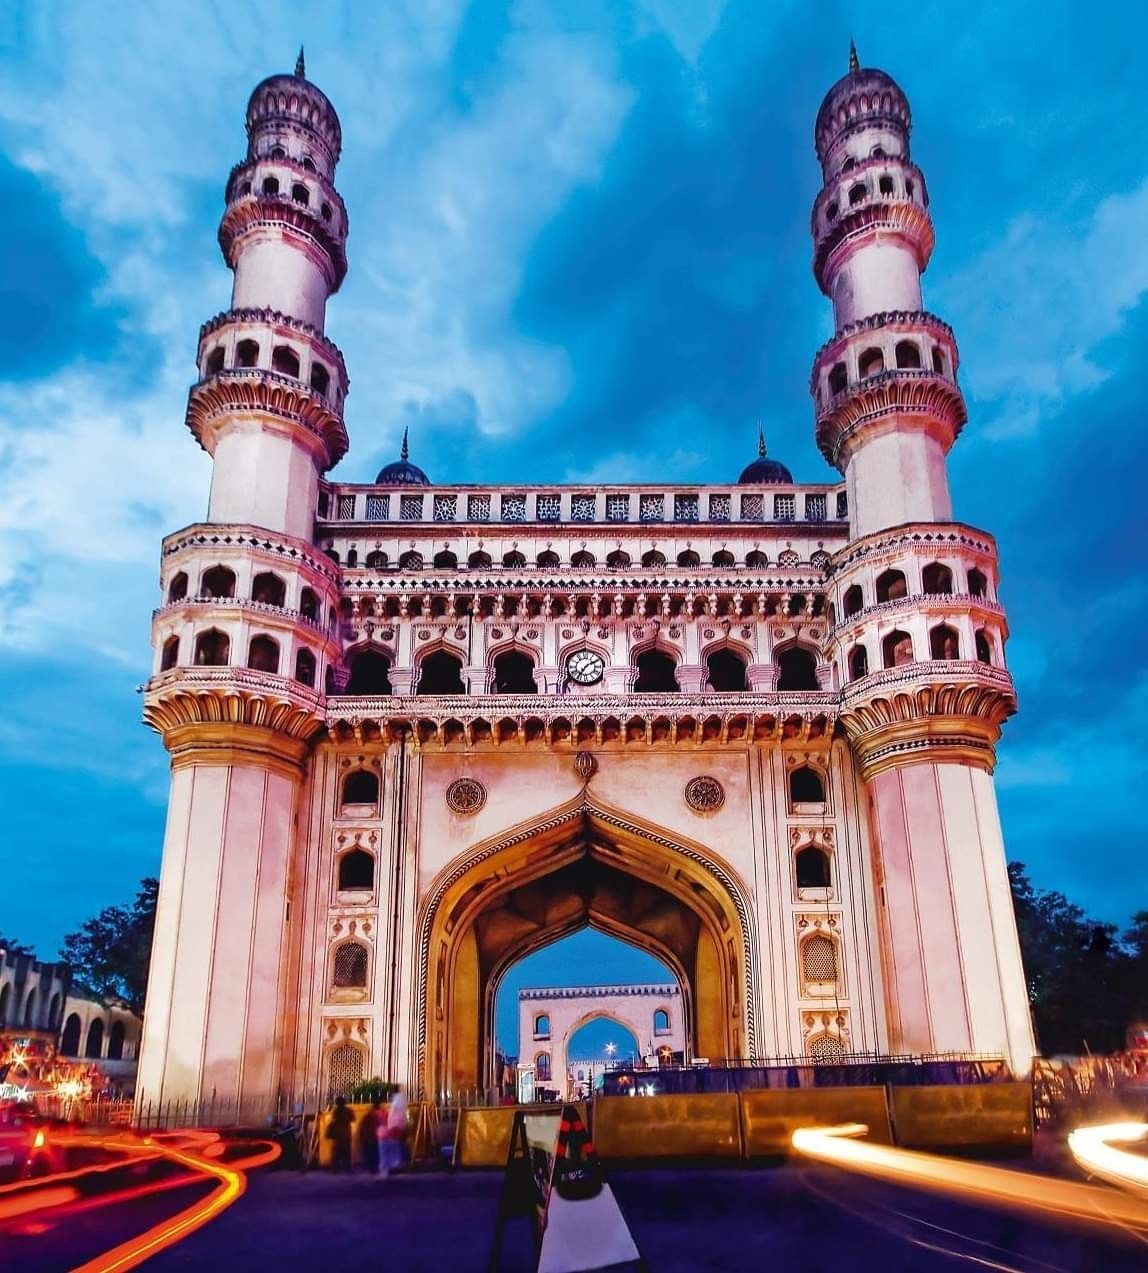 Did you know Charminar, constructed in 1591 has become known